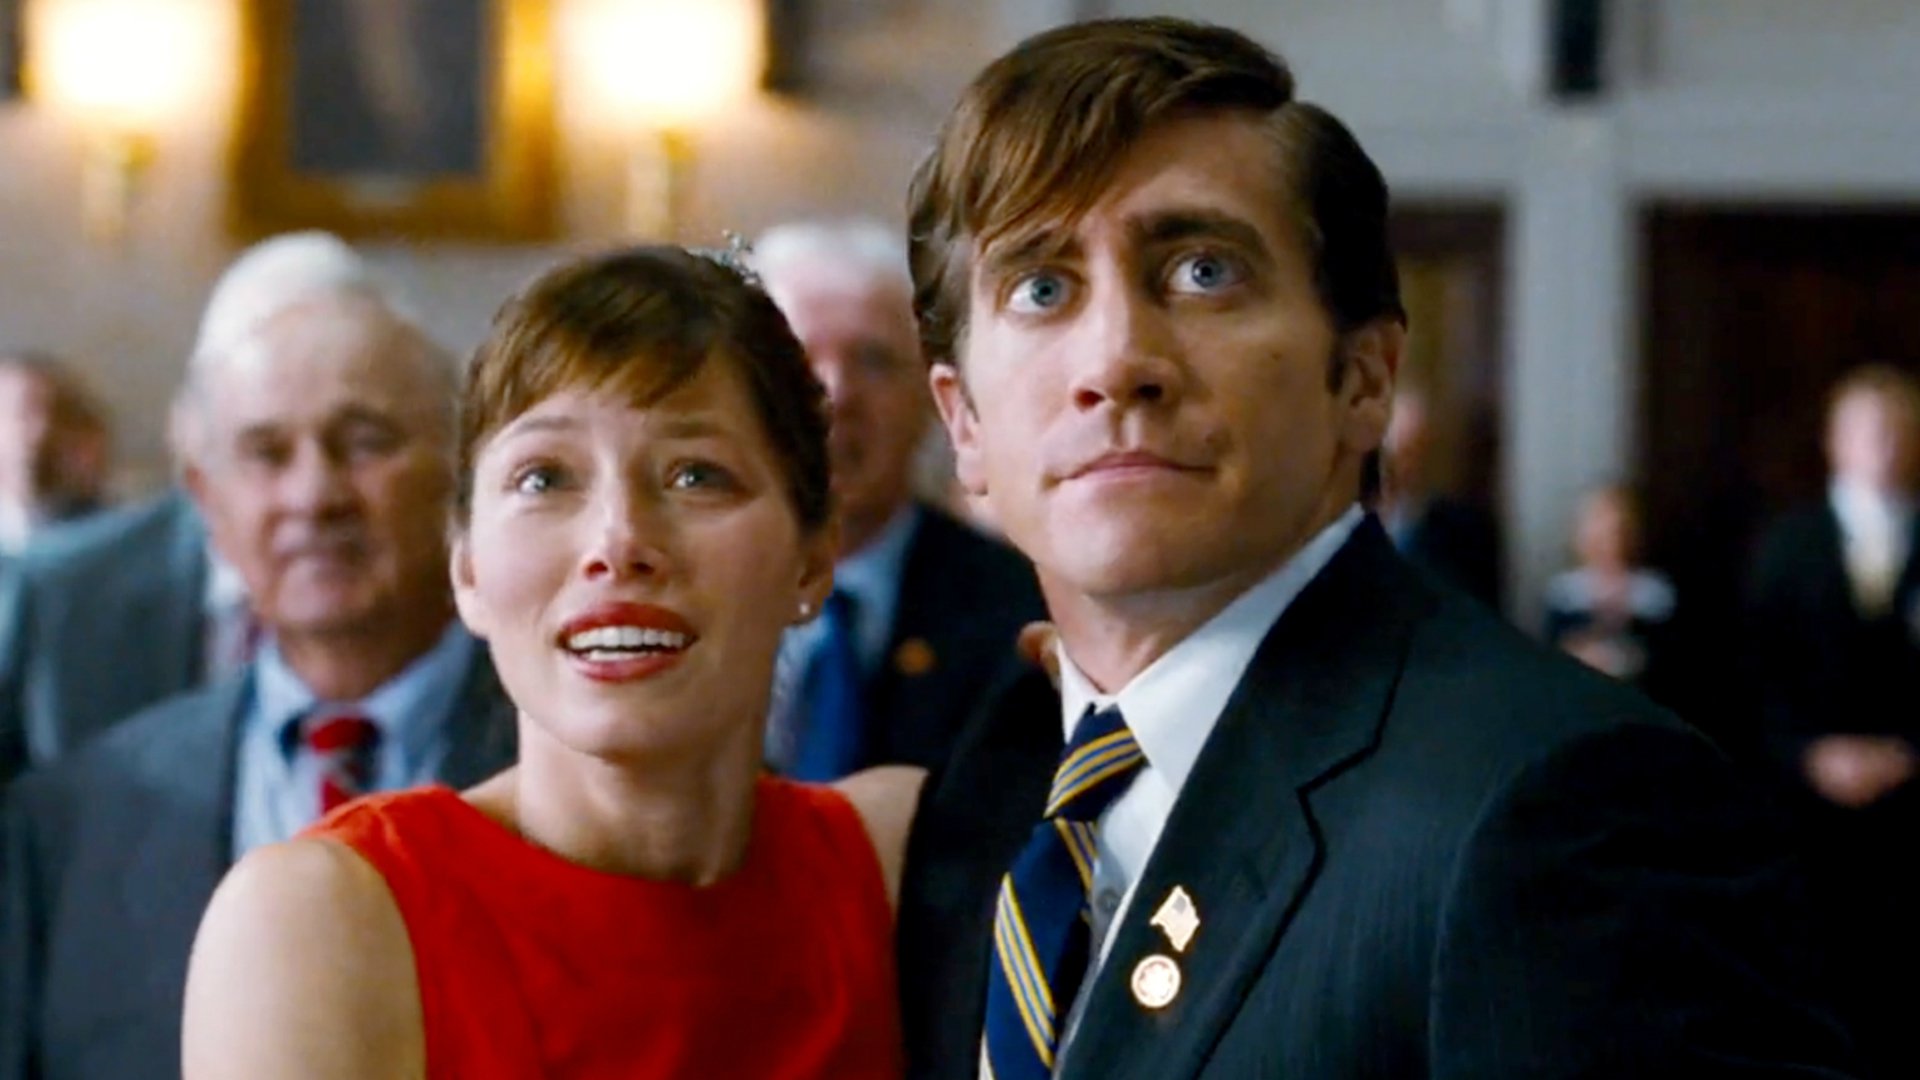 Movie Accidental Love HD Wallpaper | Background Image